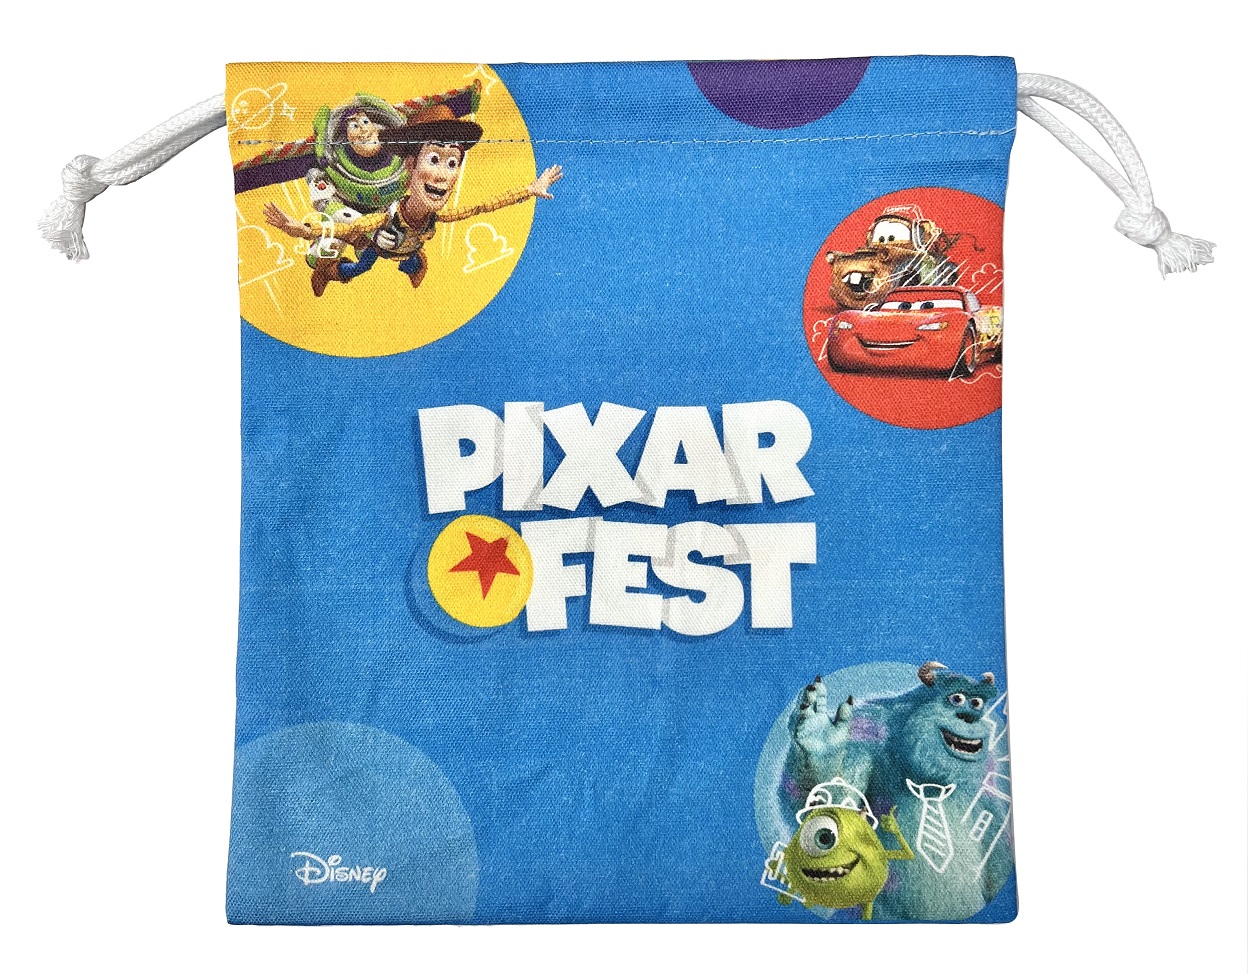 pixar-fest-pop-up-store-by-small-planet11-2-2